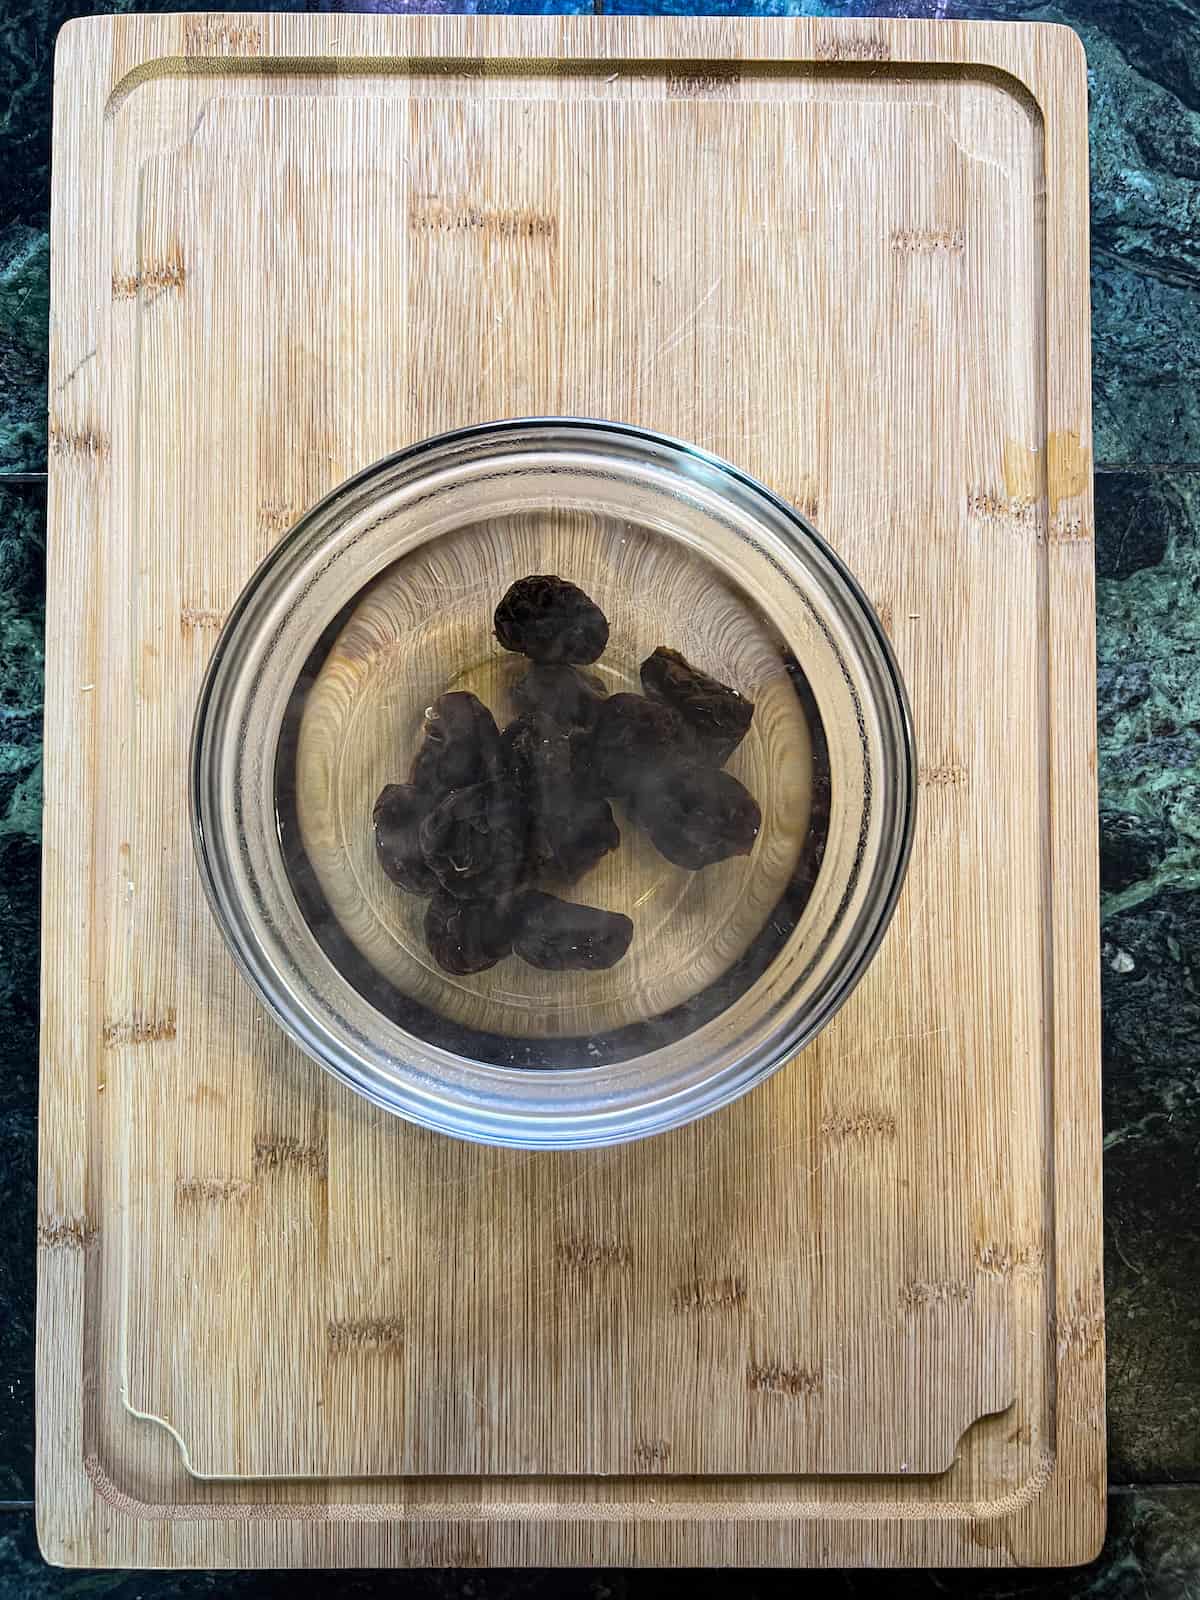 Prunes soaking in hot water in a glass bowl on a wood cutting board.